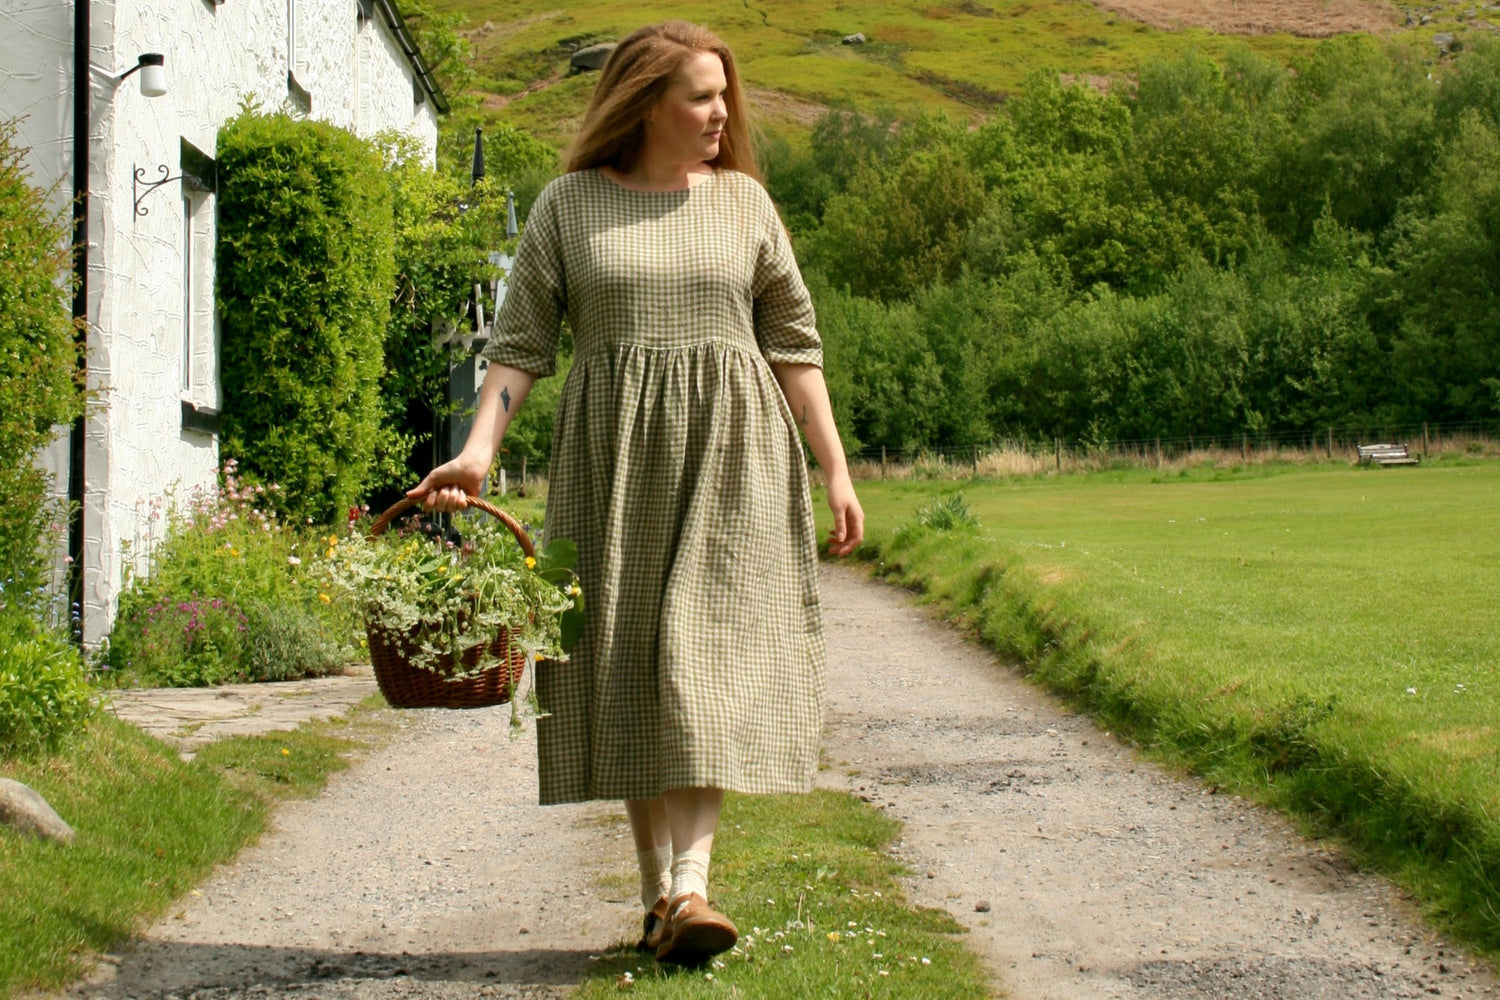 Helen linen dress with gathered skirt. Withnell slow fashion.